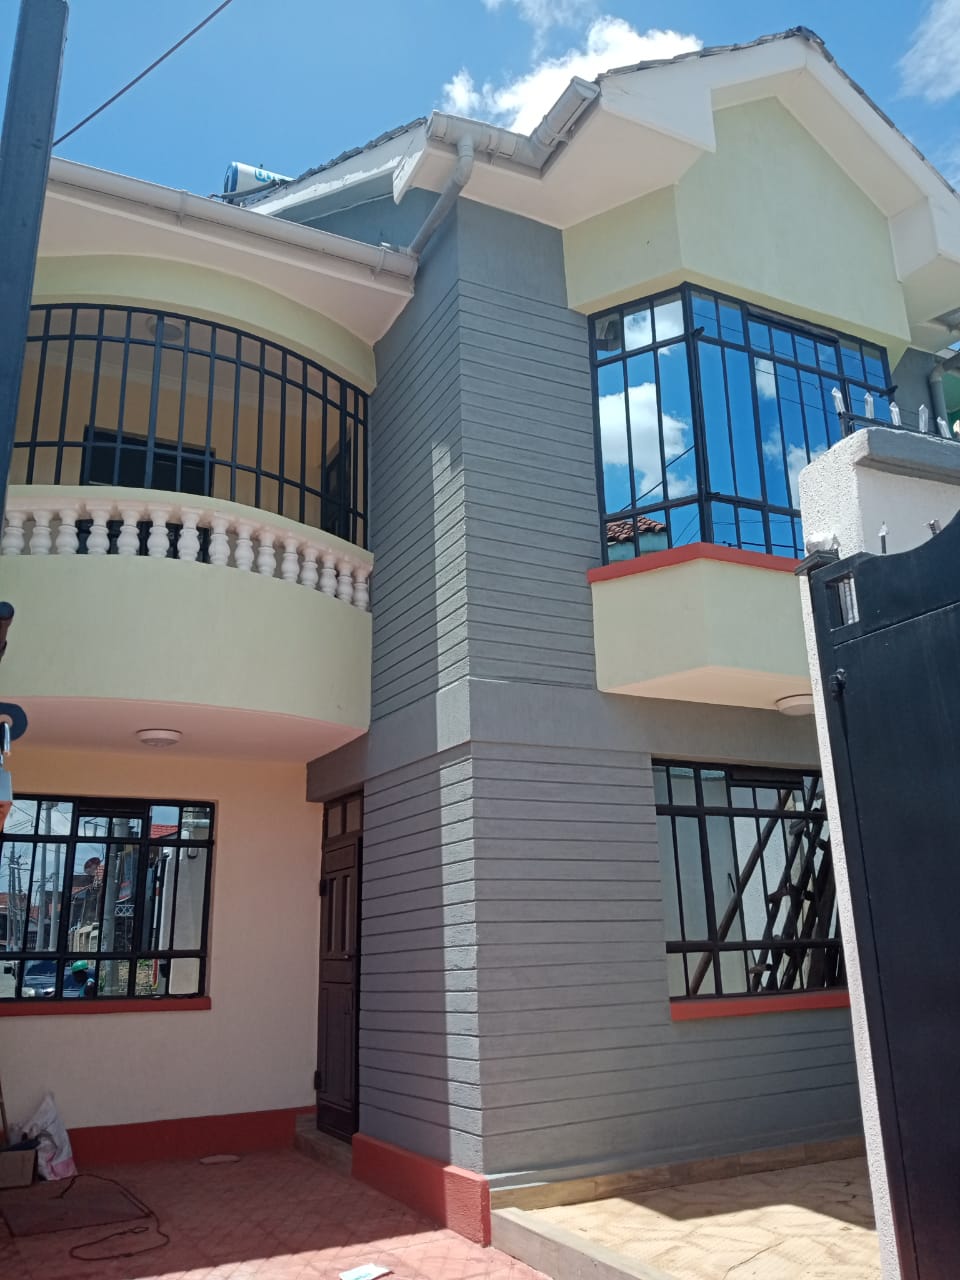 4 BEDROOM House for sale at Donholm. 